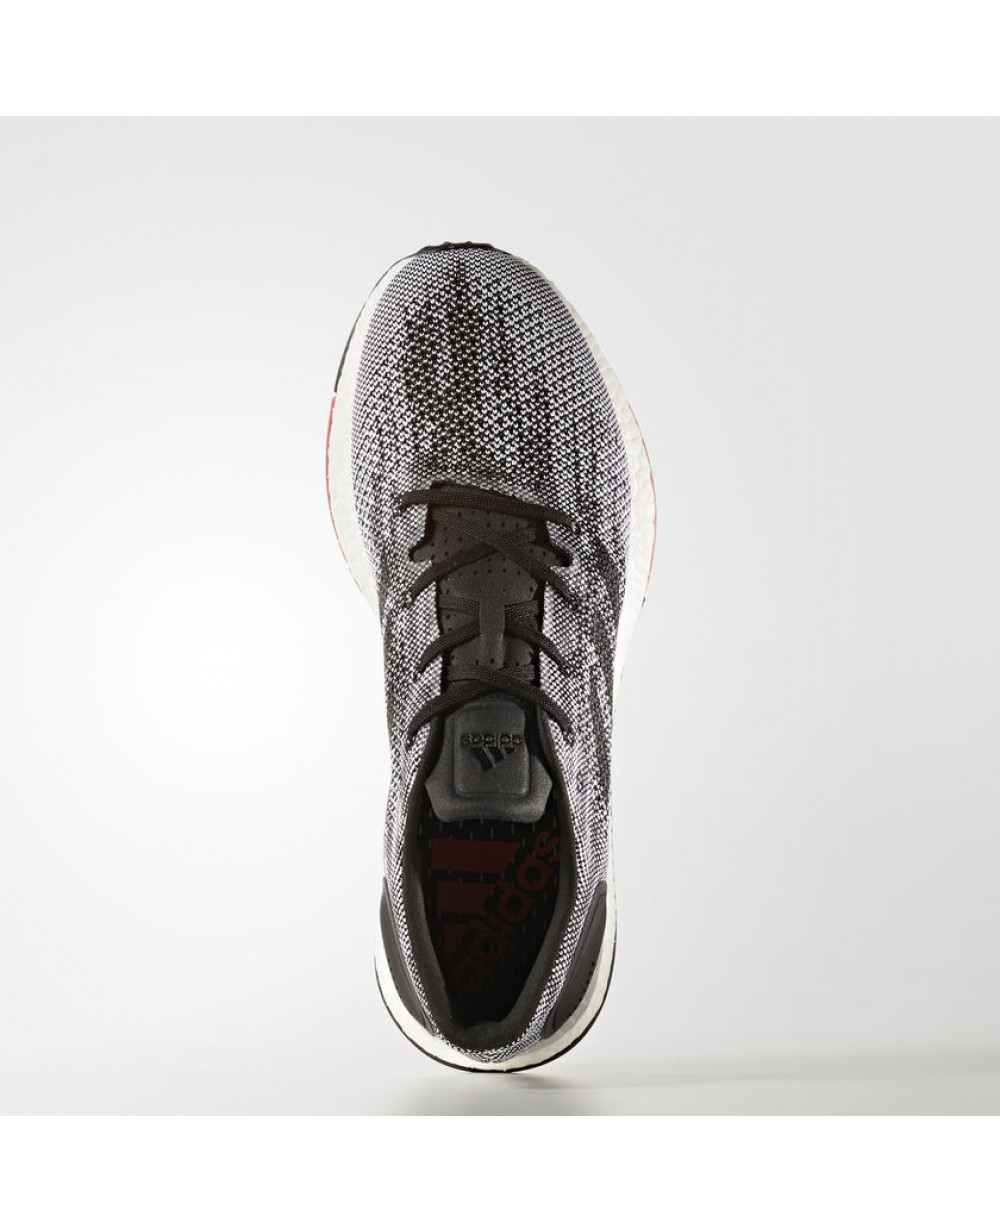 Systematically Whitney have a finger in the pie Adidas Pureboost DPR Running Shoes For Men S80993